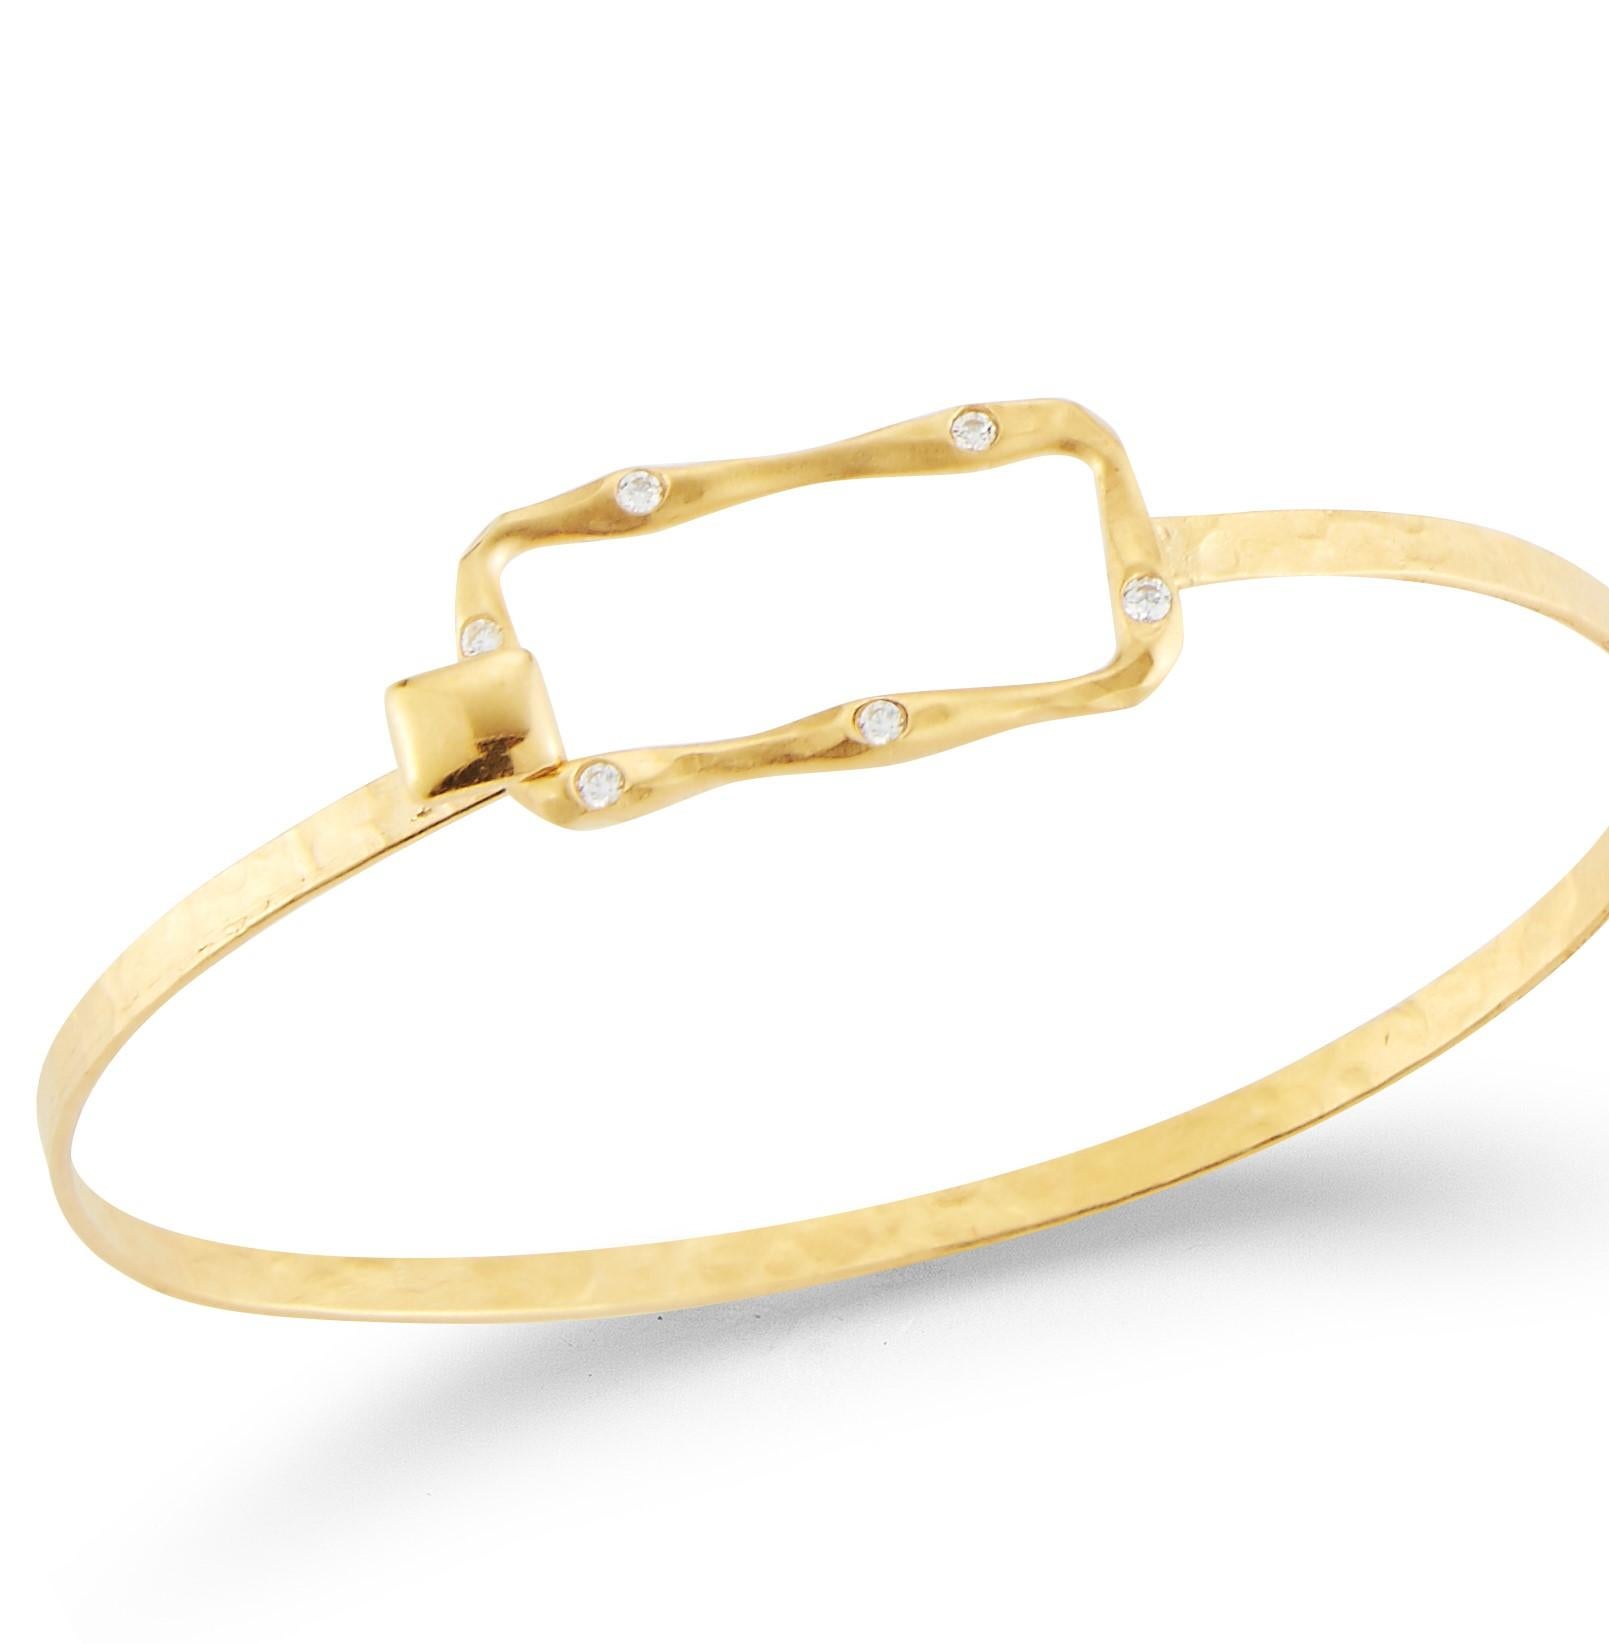 Round Cut Hand-Crafted 14K Yellow Gold Open Rectangle Bangle Bracelet. For Sale